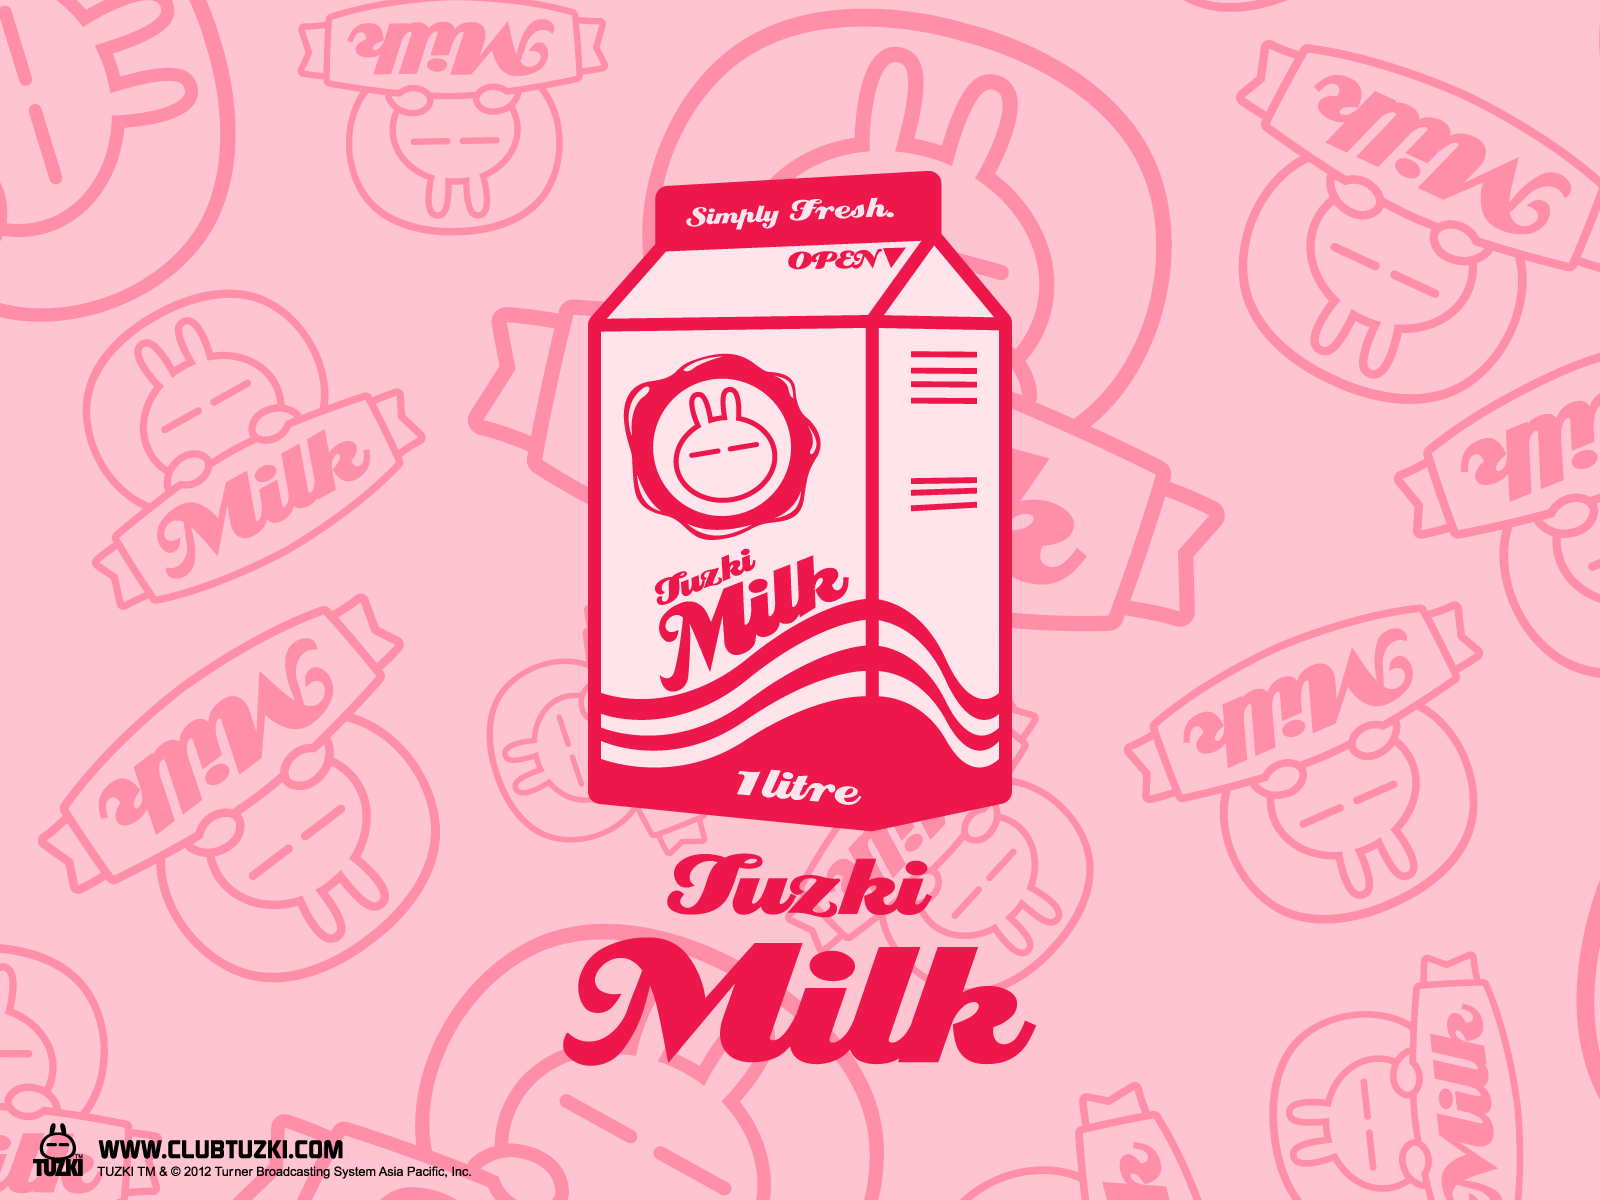 Aesthetic Kawaii Wallpaper Milk / Discover photo, videos and articles from friends that share your passion for beauty, fashion, photography, travel, music, wallpaper and more